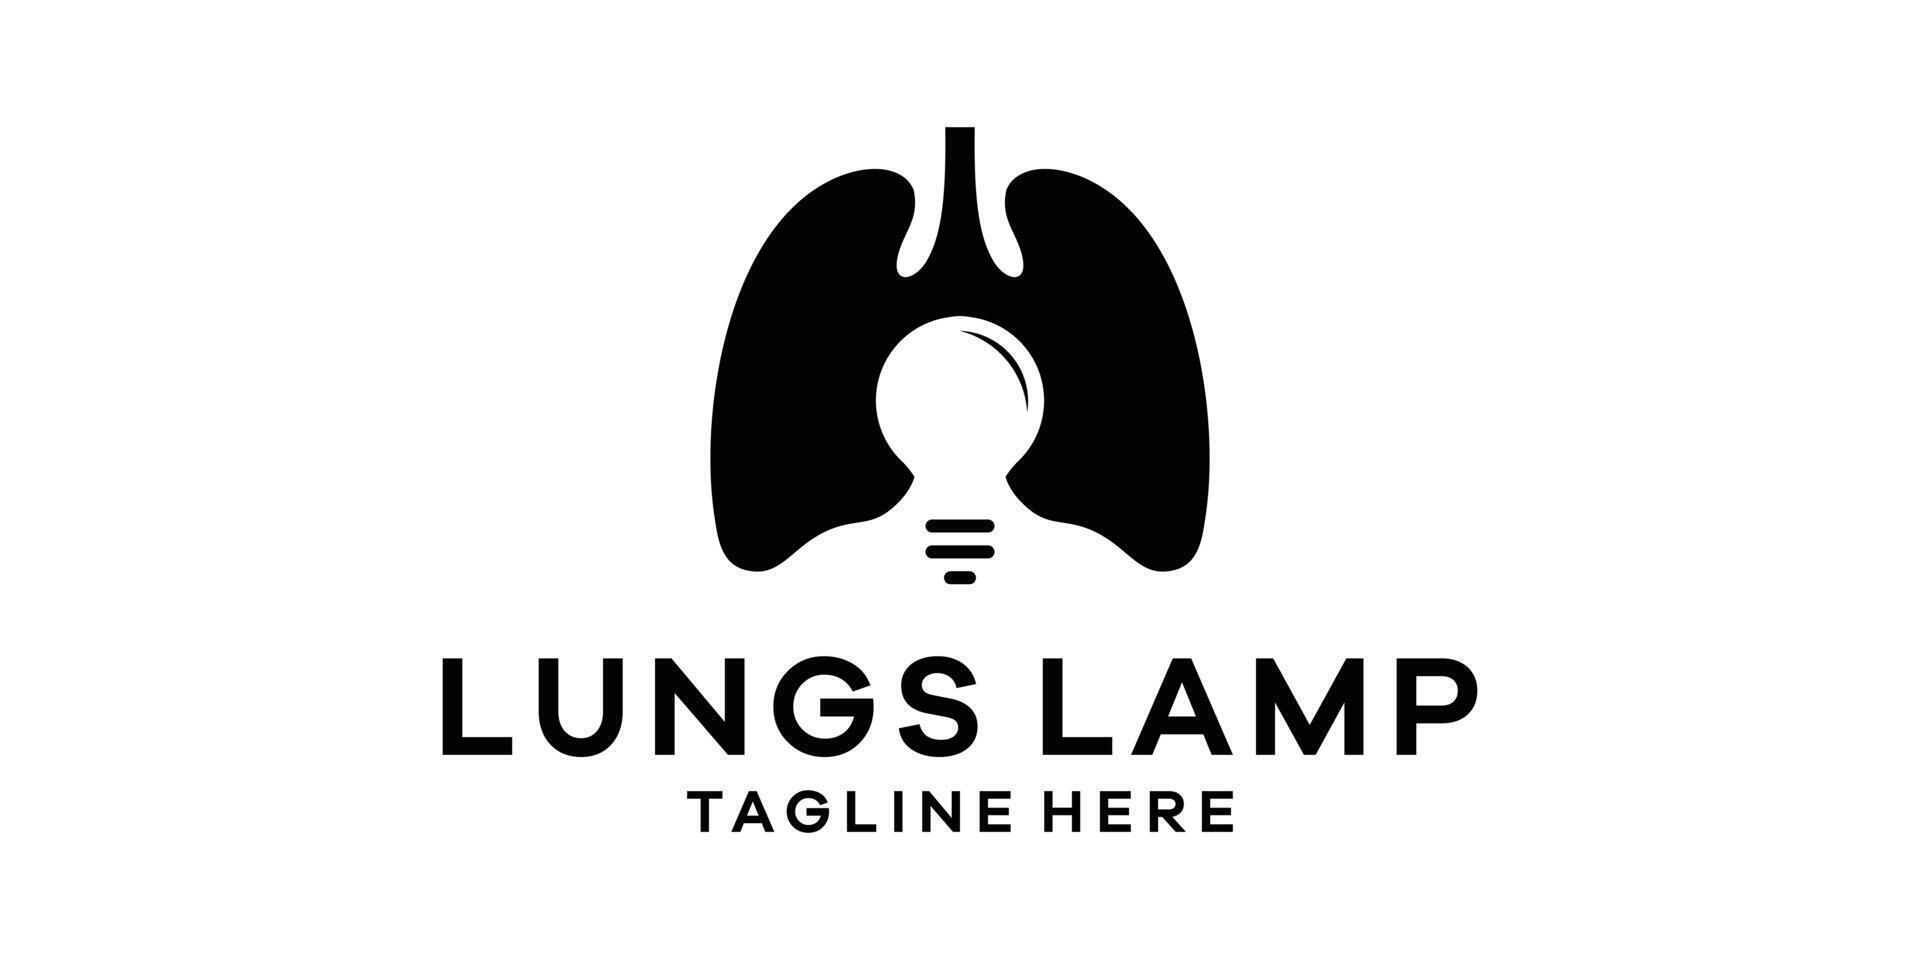 logo design combining the shape of lungs with lights, logo design template, creative idea symbol. vector